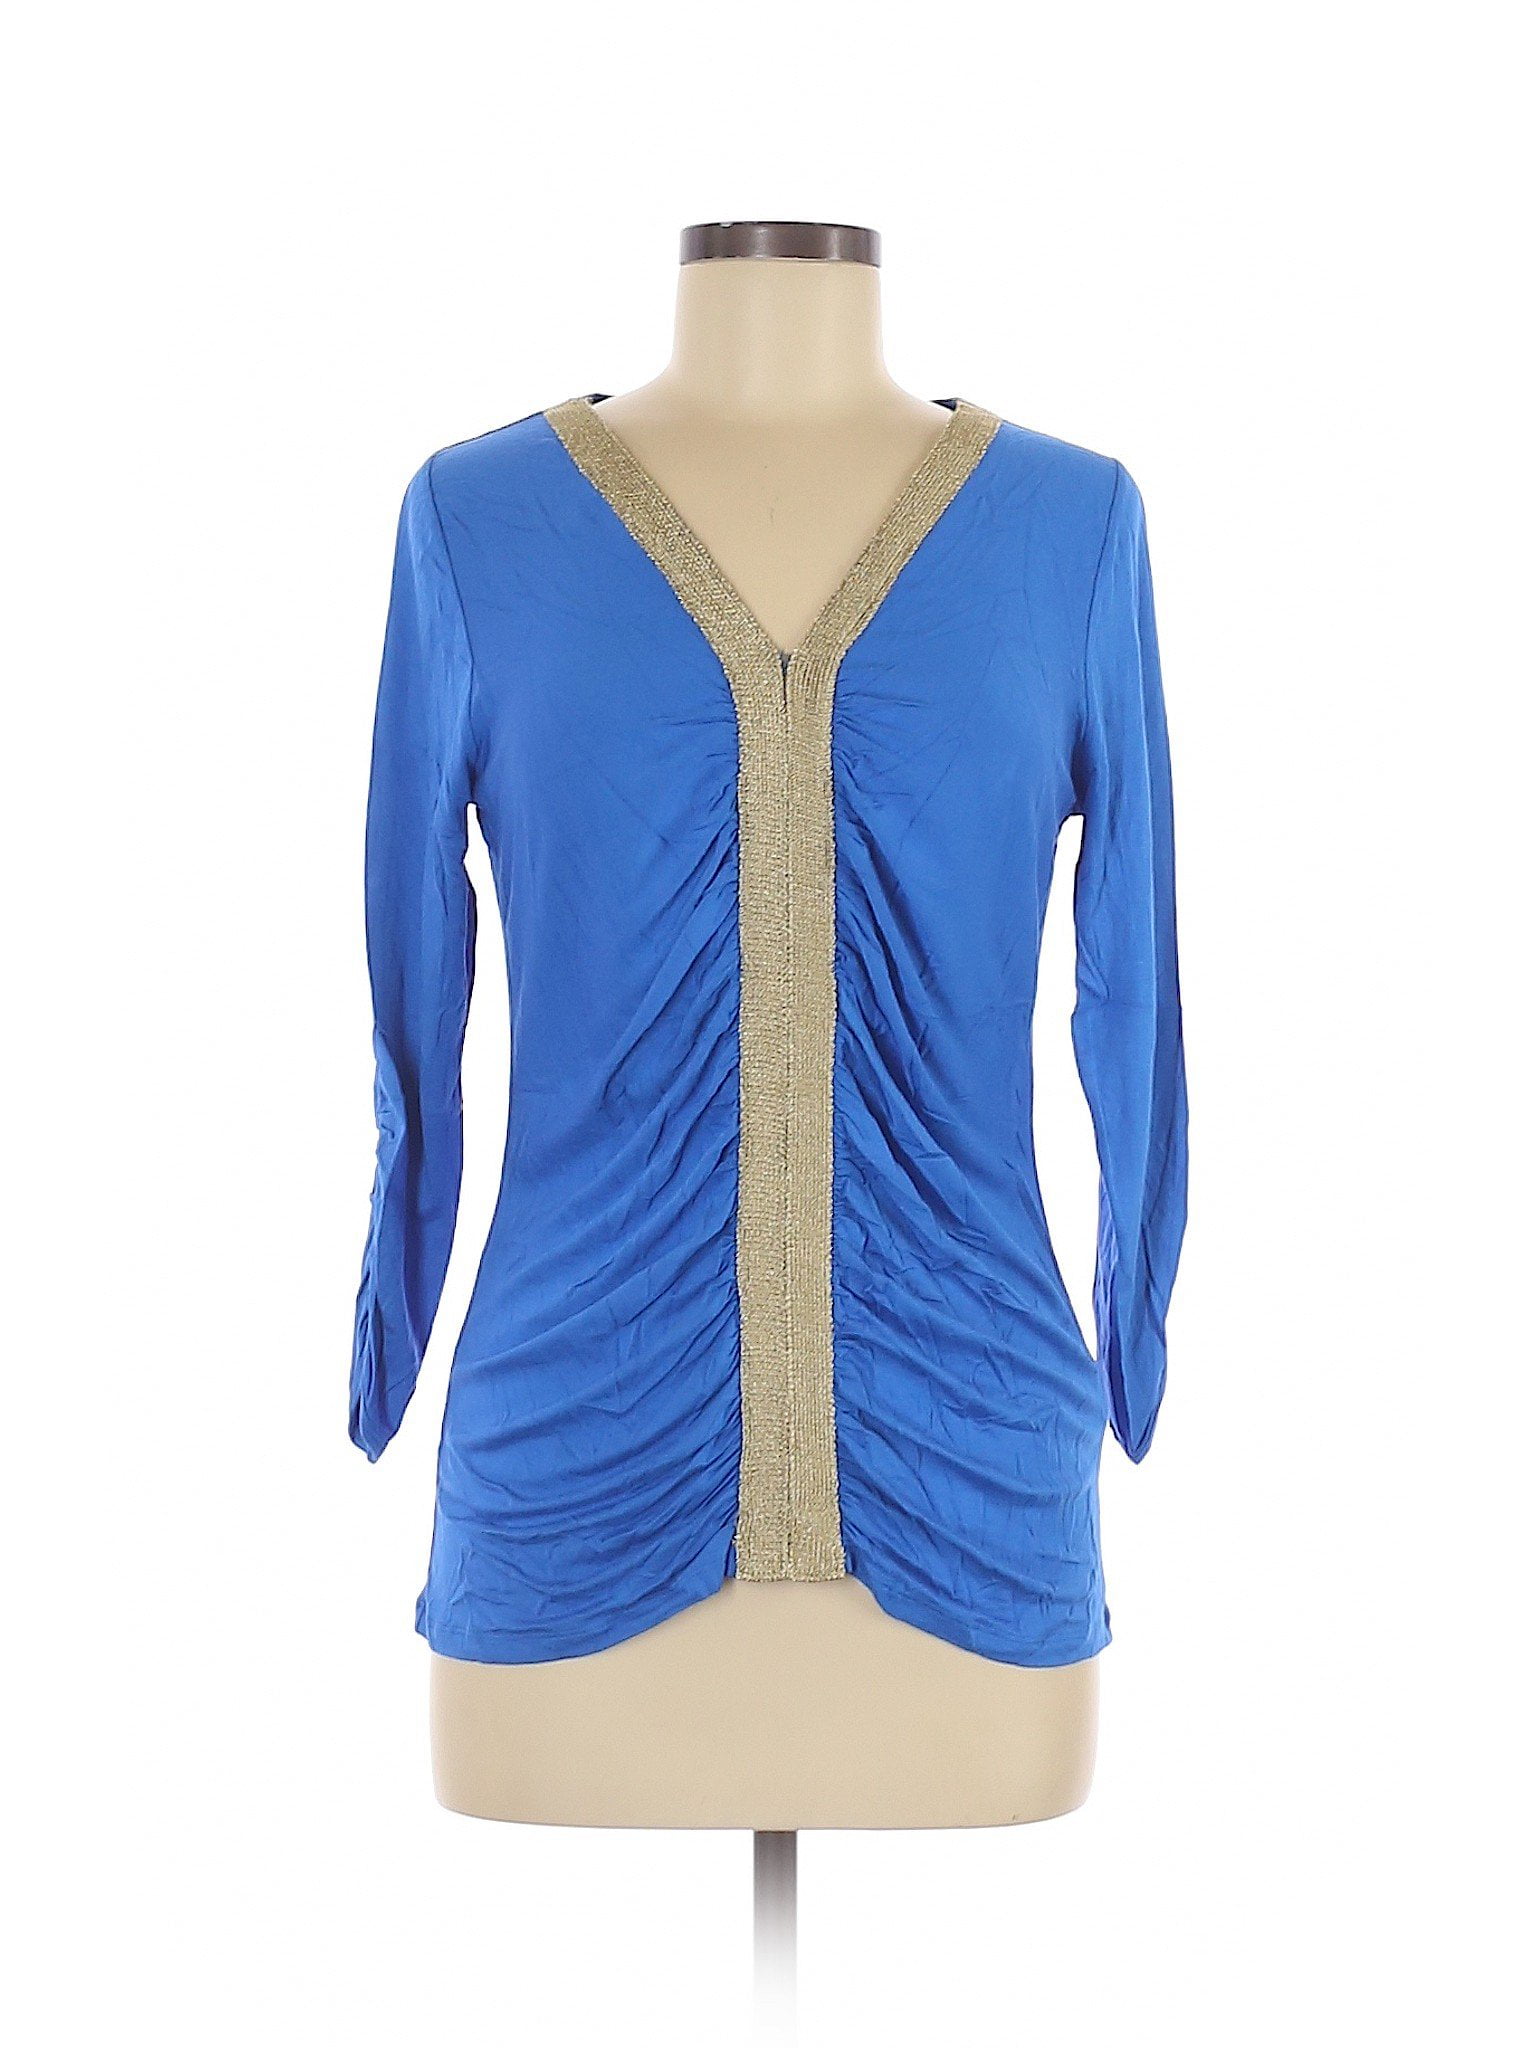 August Silk - Pre-Owned August Silk Women's Size M Long Sleeve Top ...